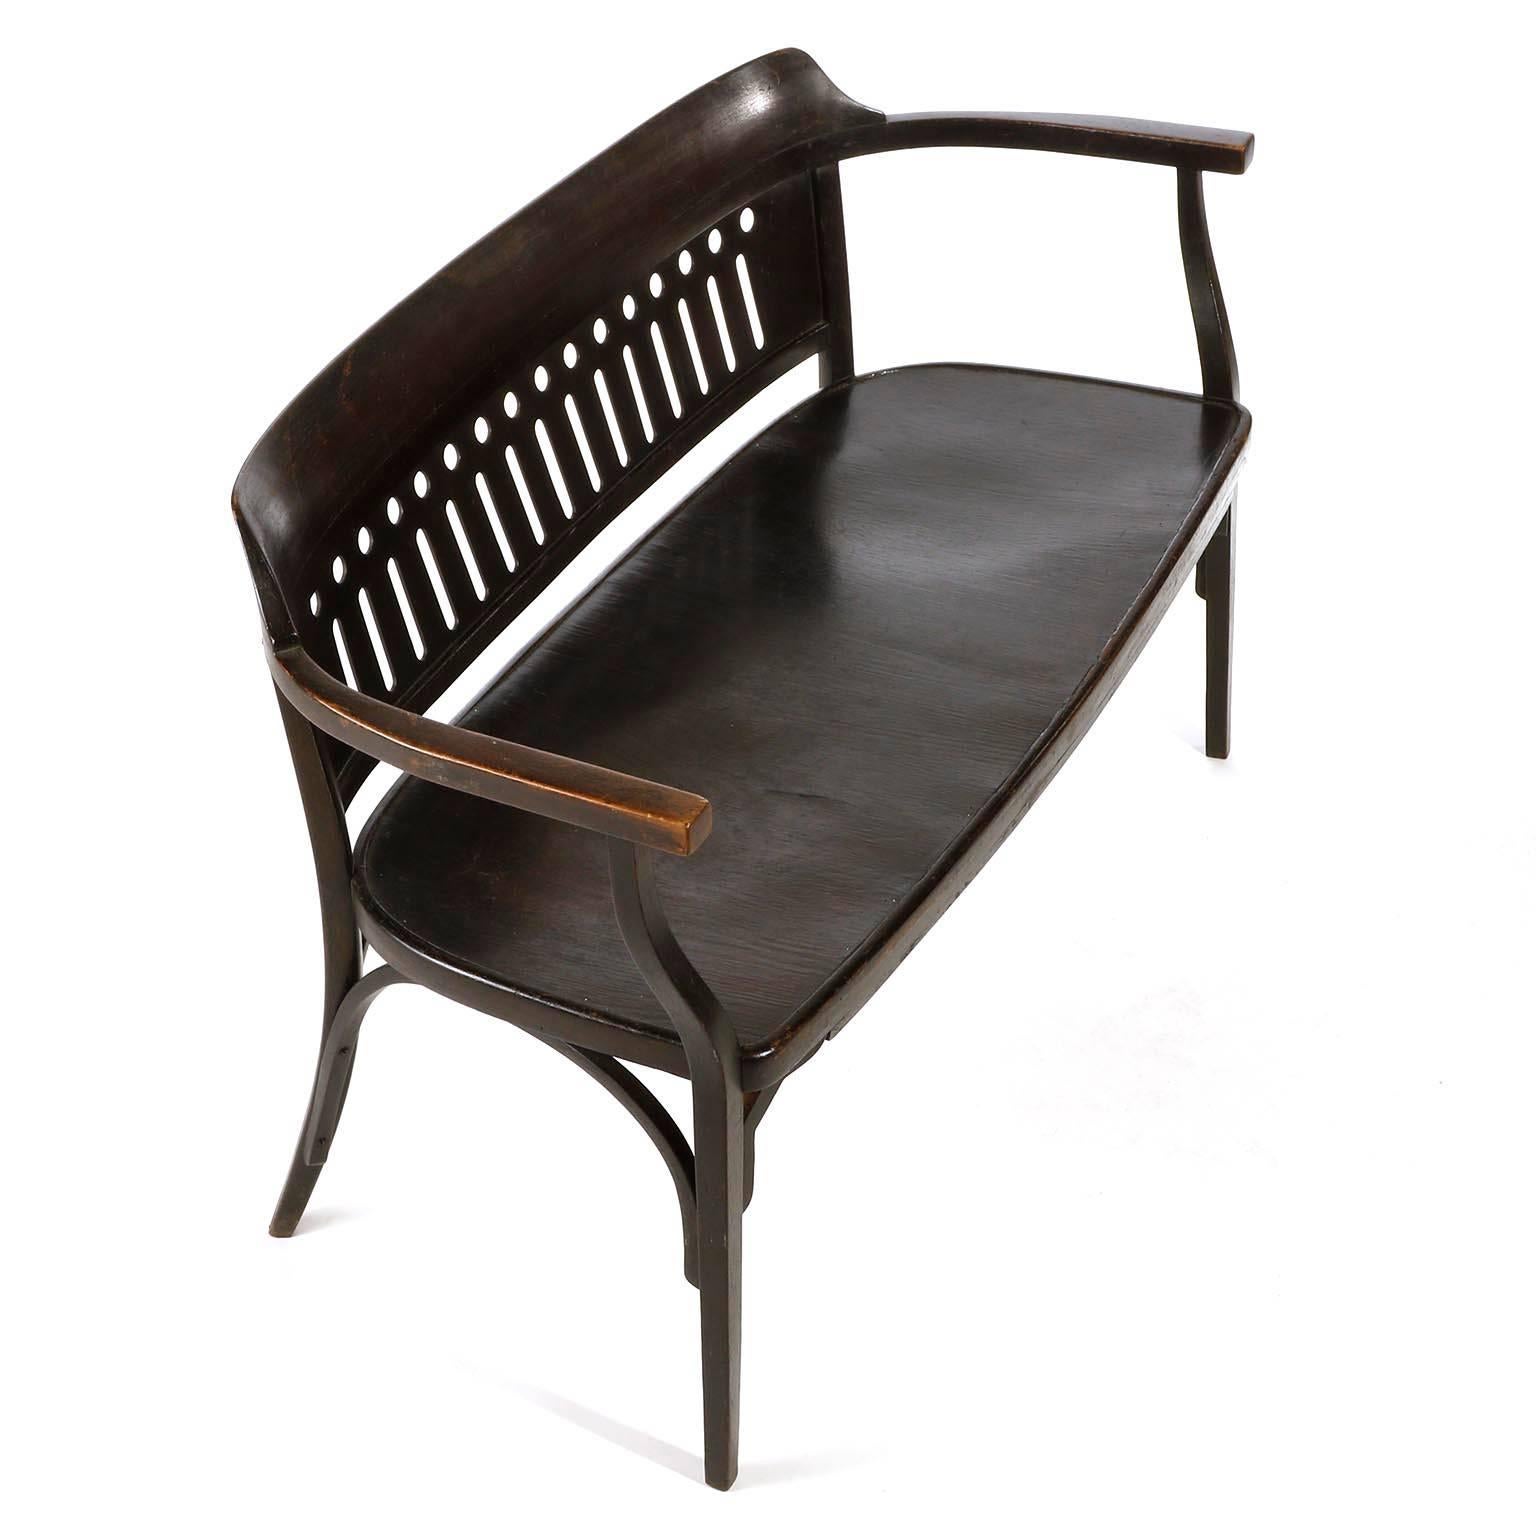 Beech Otto Wagner Settee Bench Bentwood, Thonet, Austria, Vienna Secession, circa 1905 For Sale